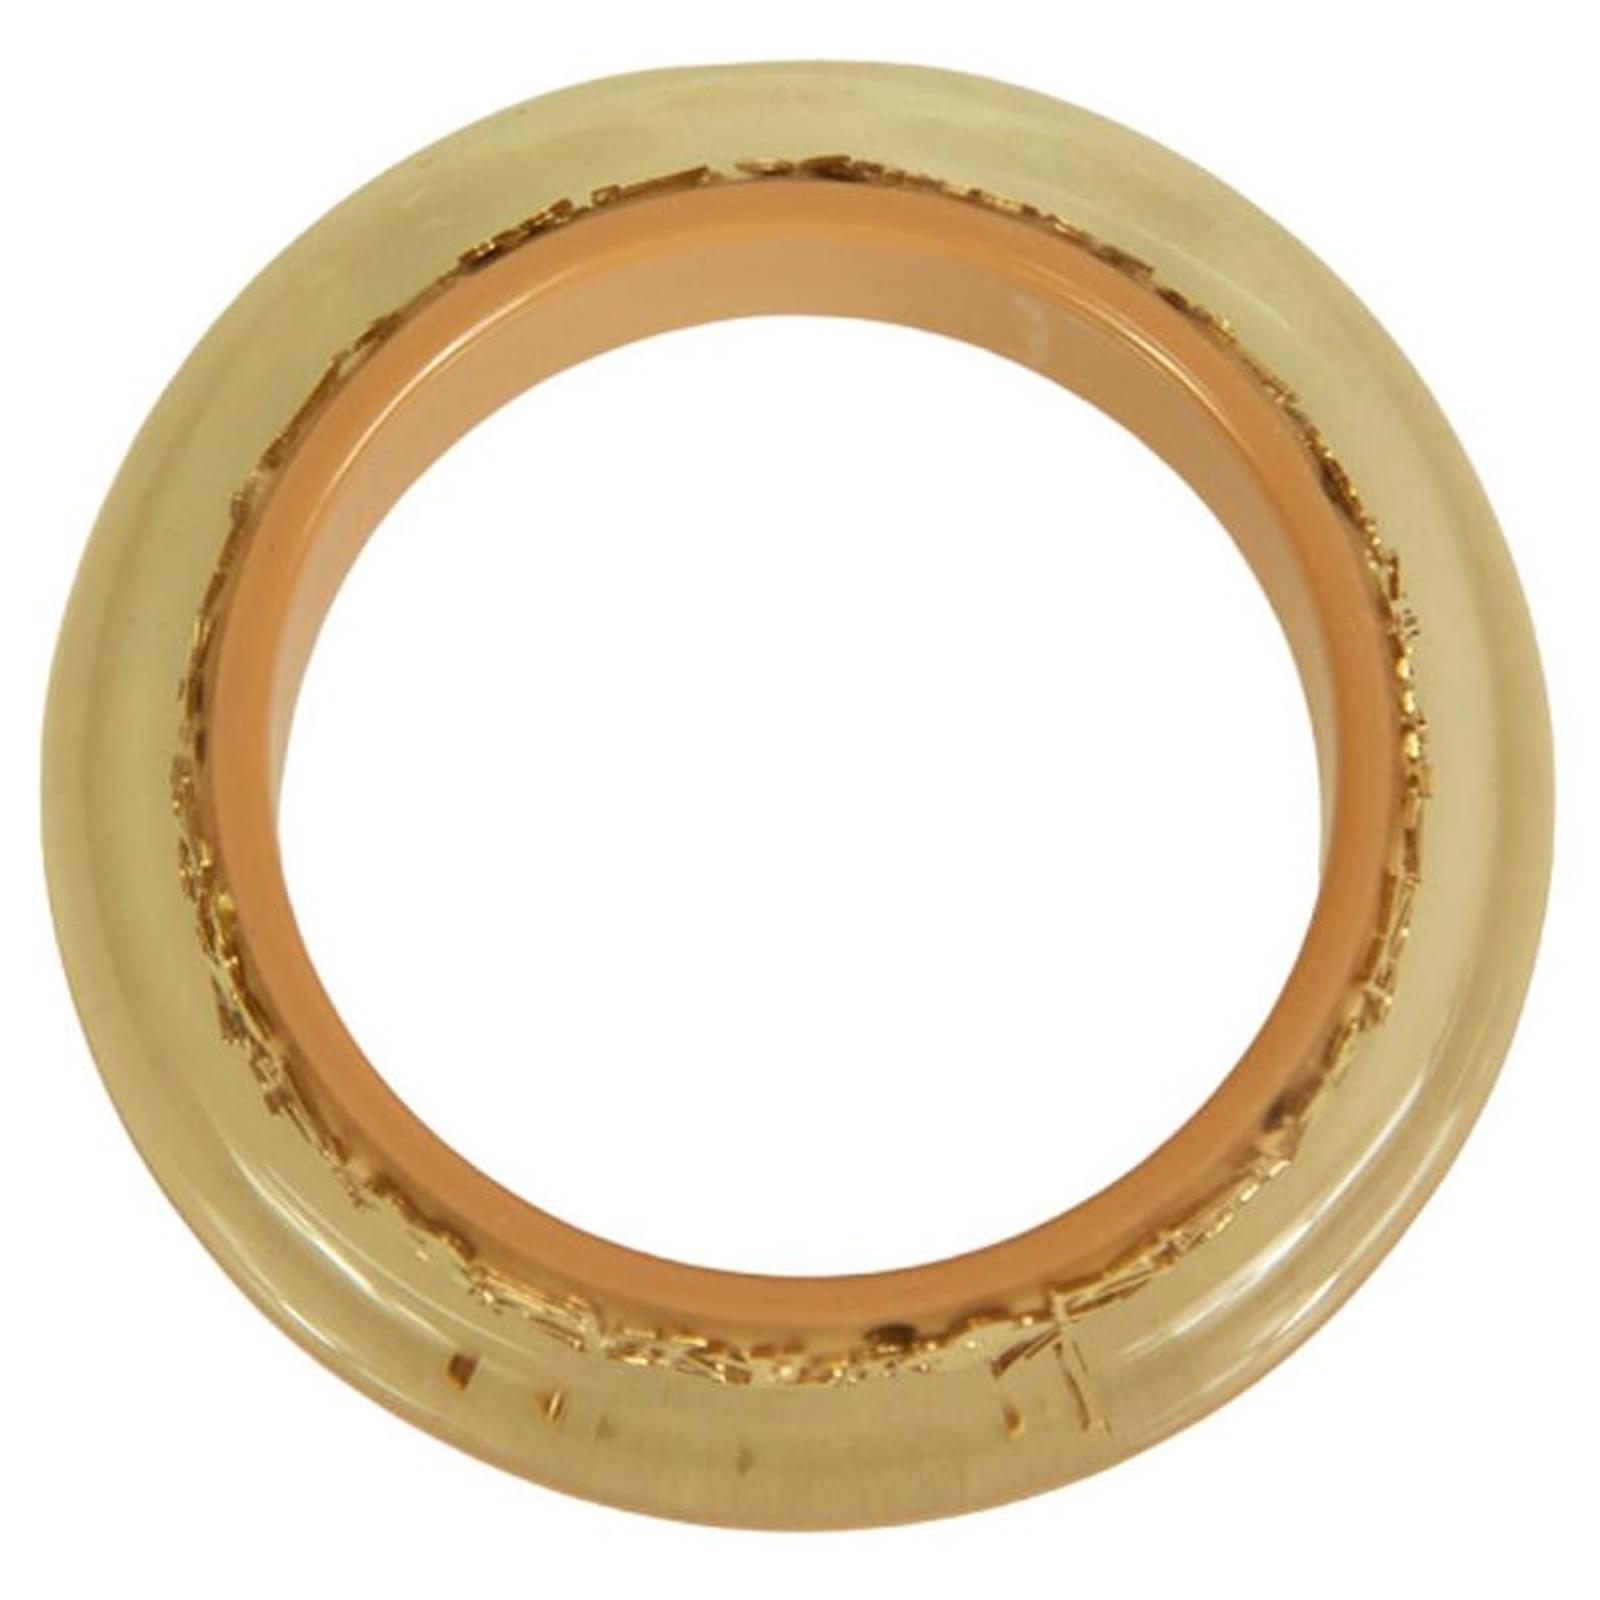 Louis Vuitton beige with gold Inclusion resin sequins bangle